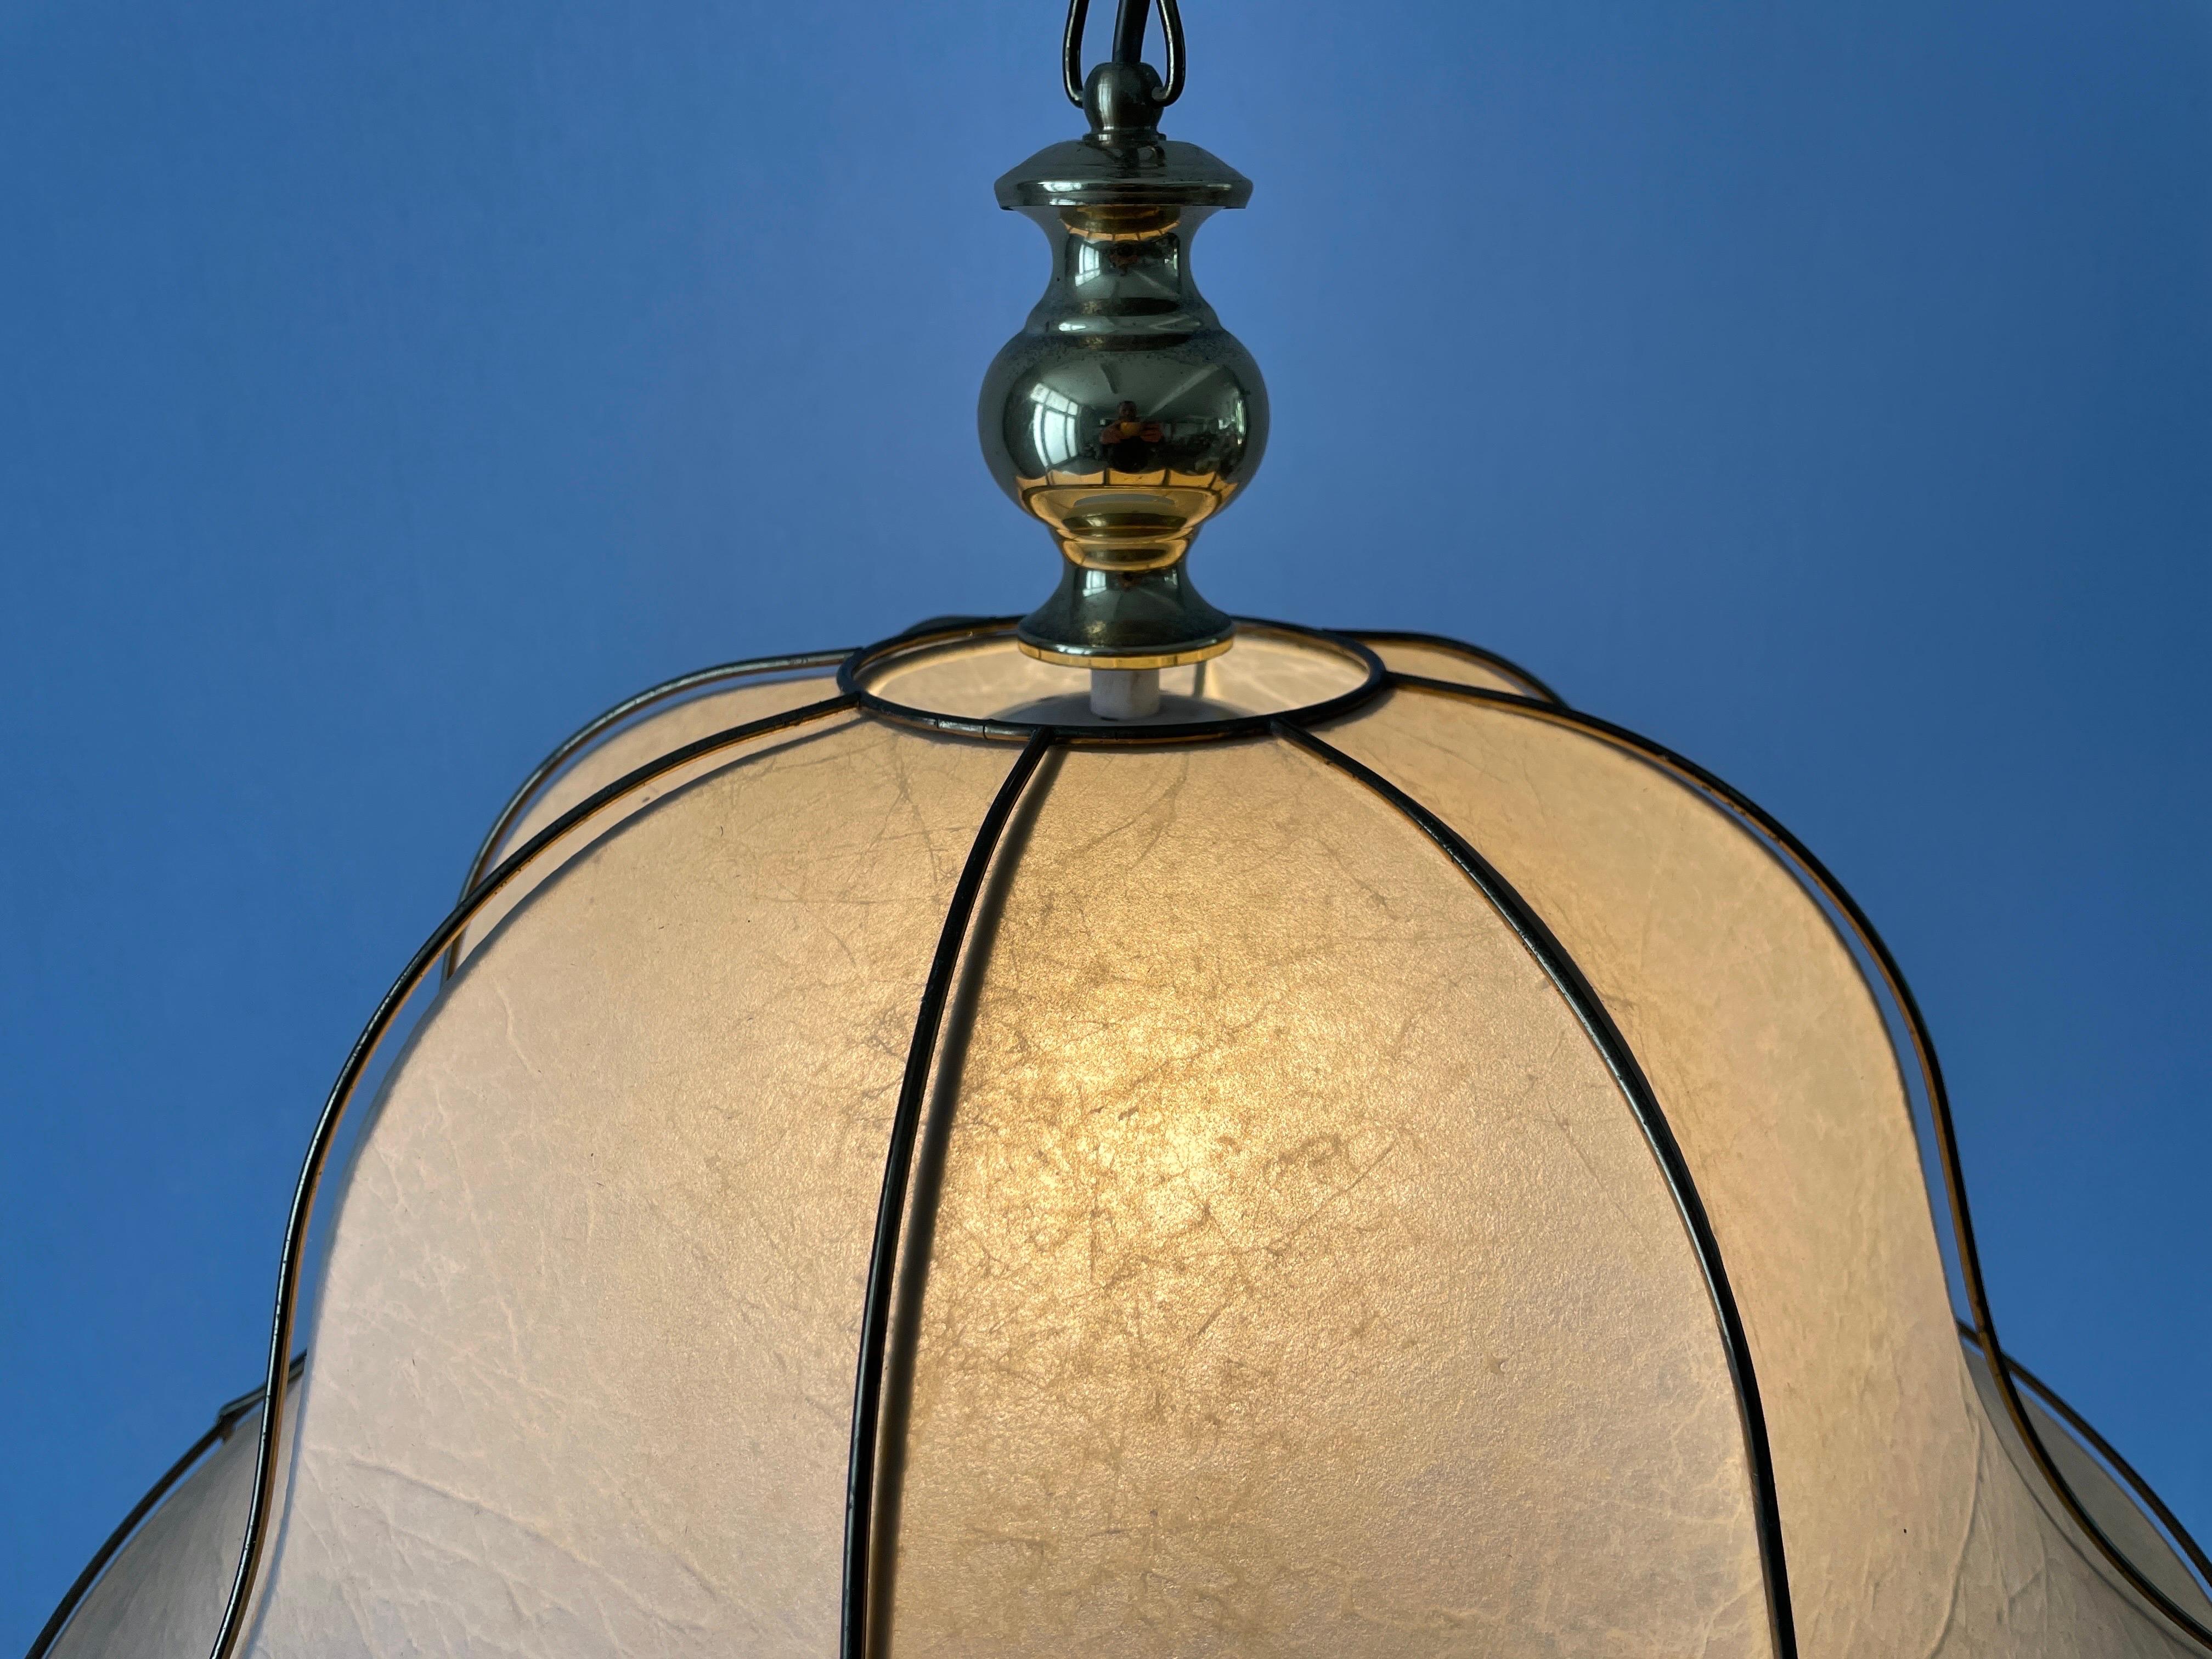 Cocoon Pendant Lamp with Gold Metal Shade Frame by Goldkant, 1960s, Germany For Sale 9